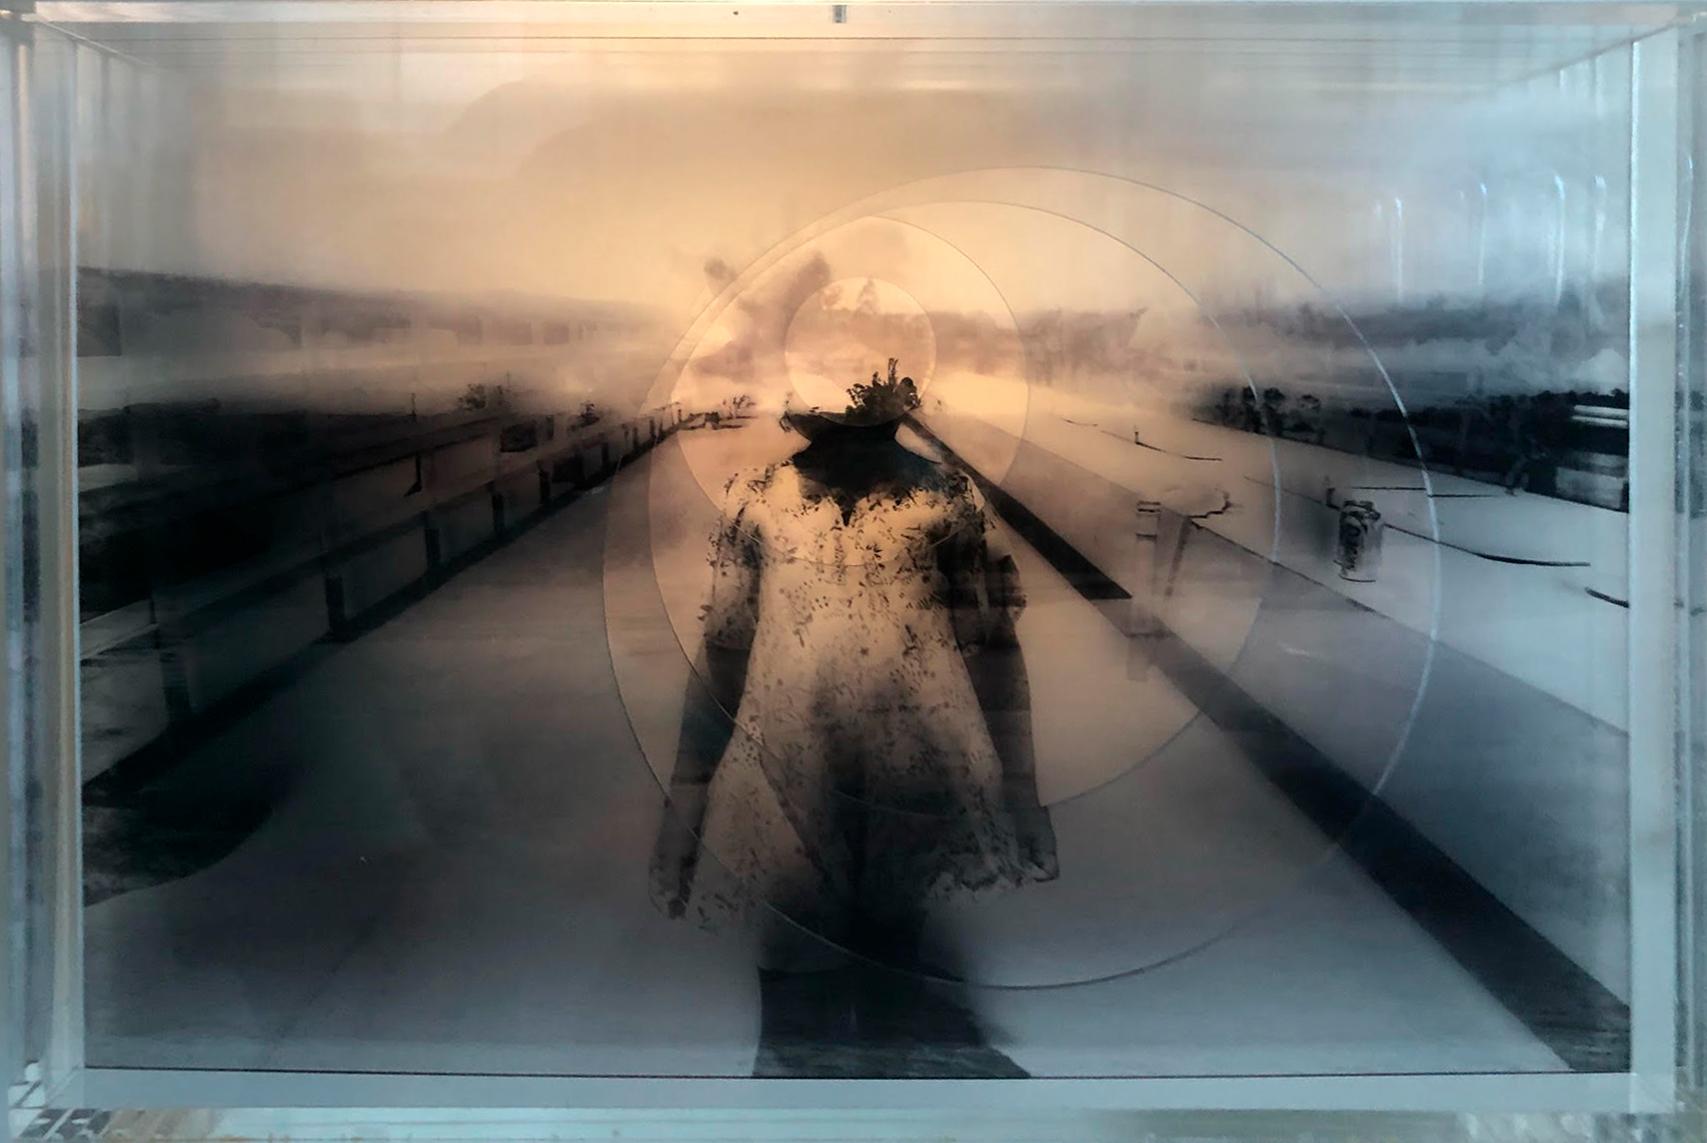 O Barco 'The Boat'. Sculpture Lightbox Made of Multiple Exposure Photograph